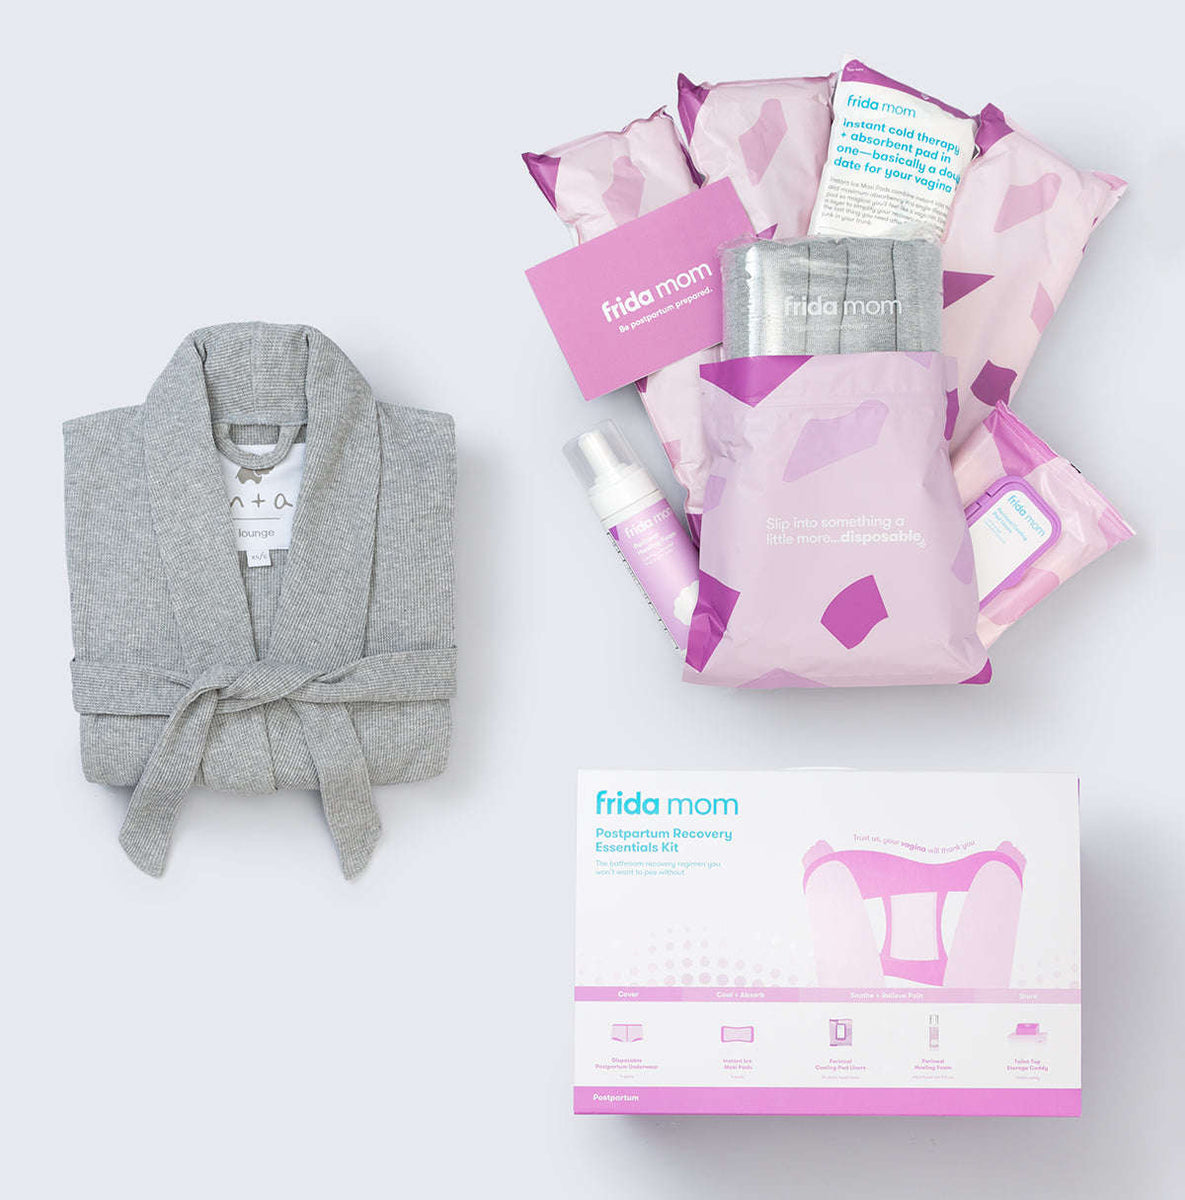 Frida Mom Postpartum Recovery Essentials - multiple full size items NEW -  Simpson Advanced Chiropractic & Medical Center